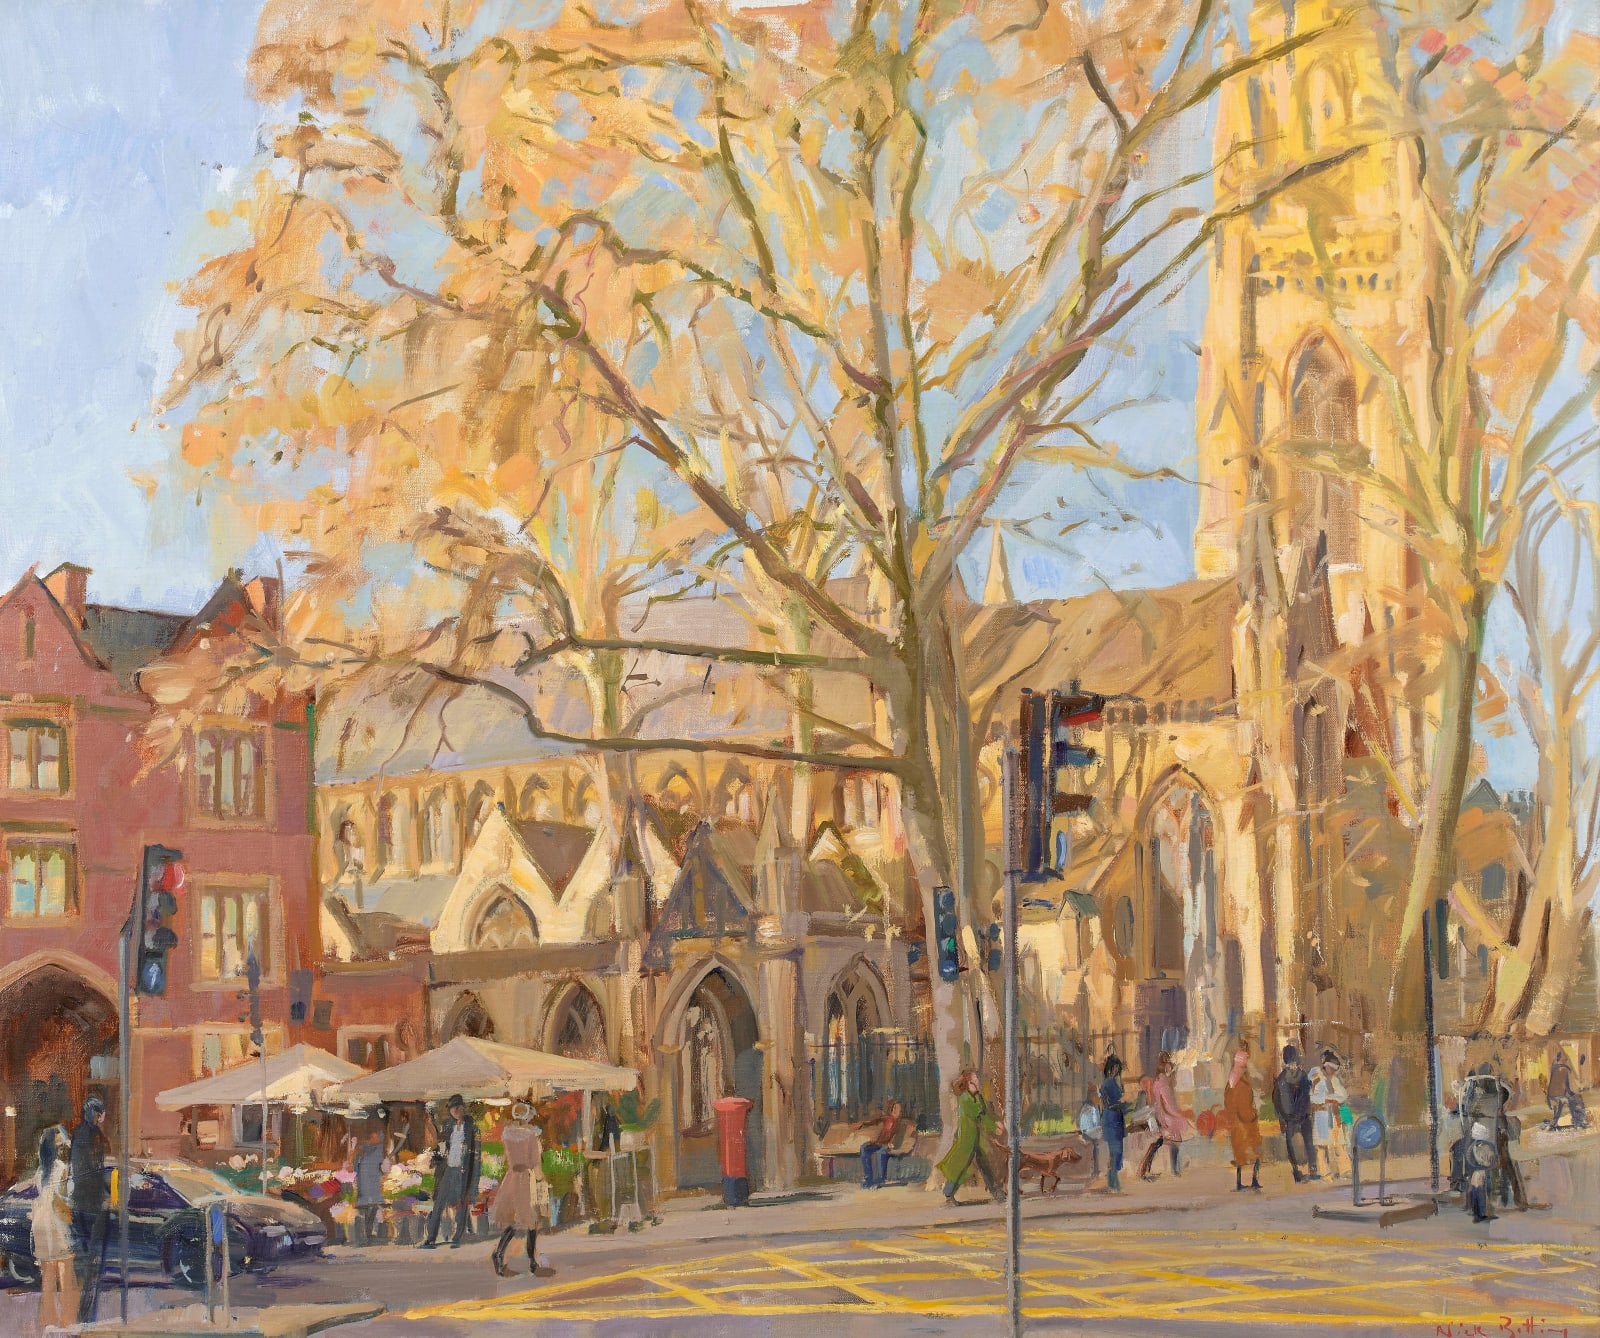 Nick Botting, A Bright Winter's Day in Kensington